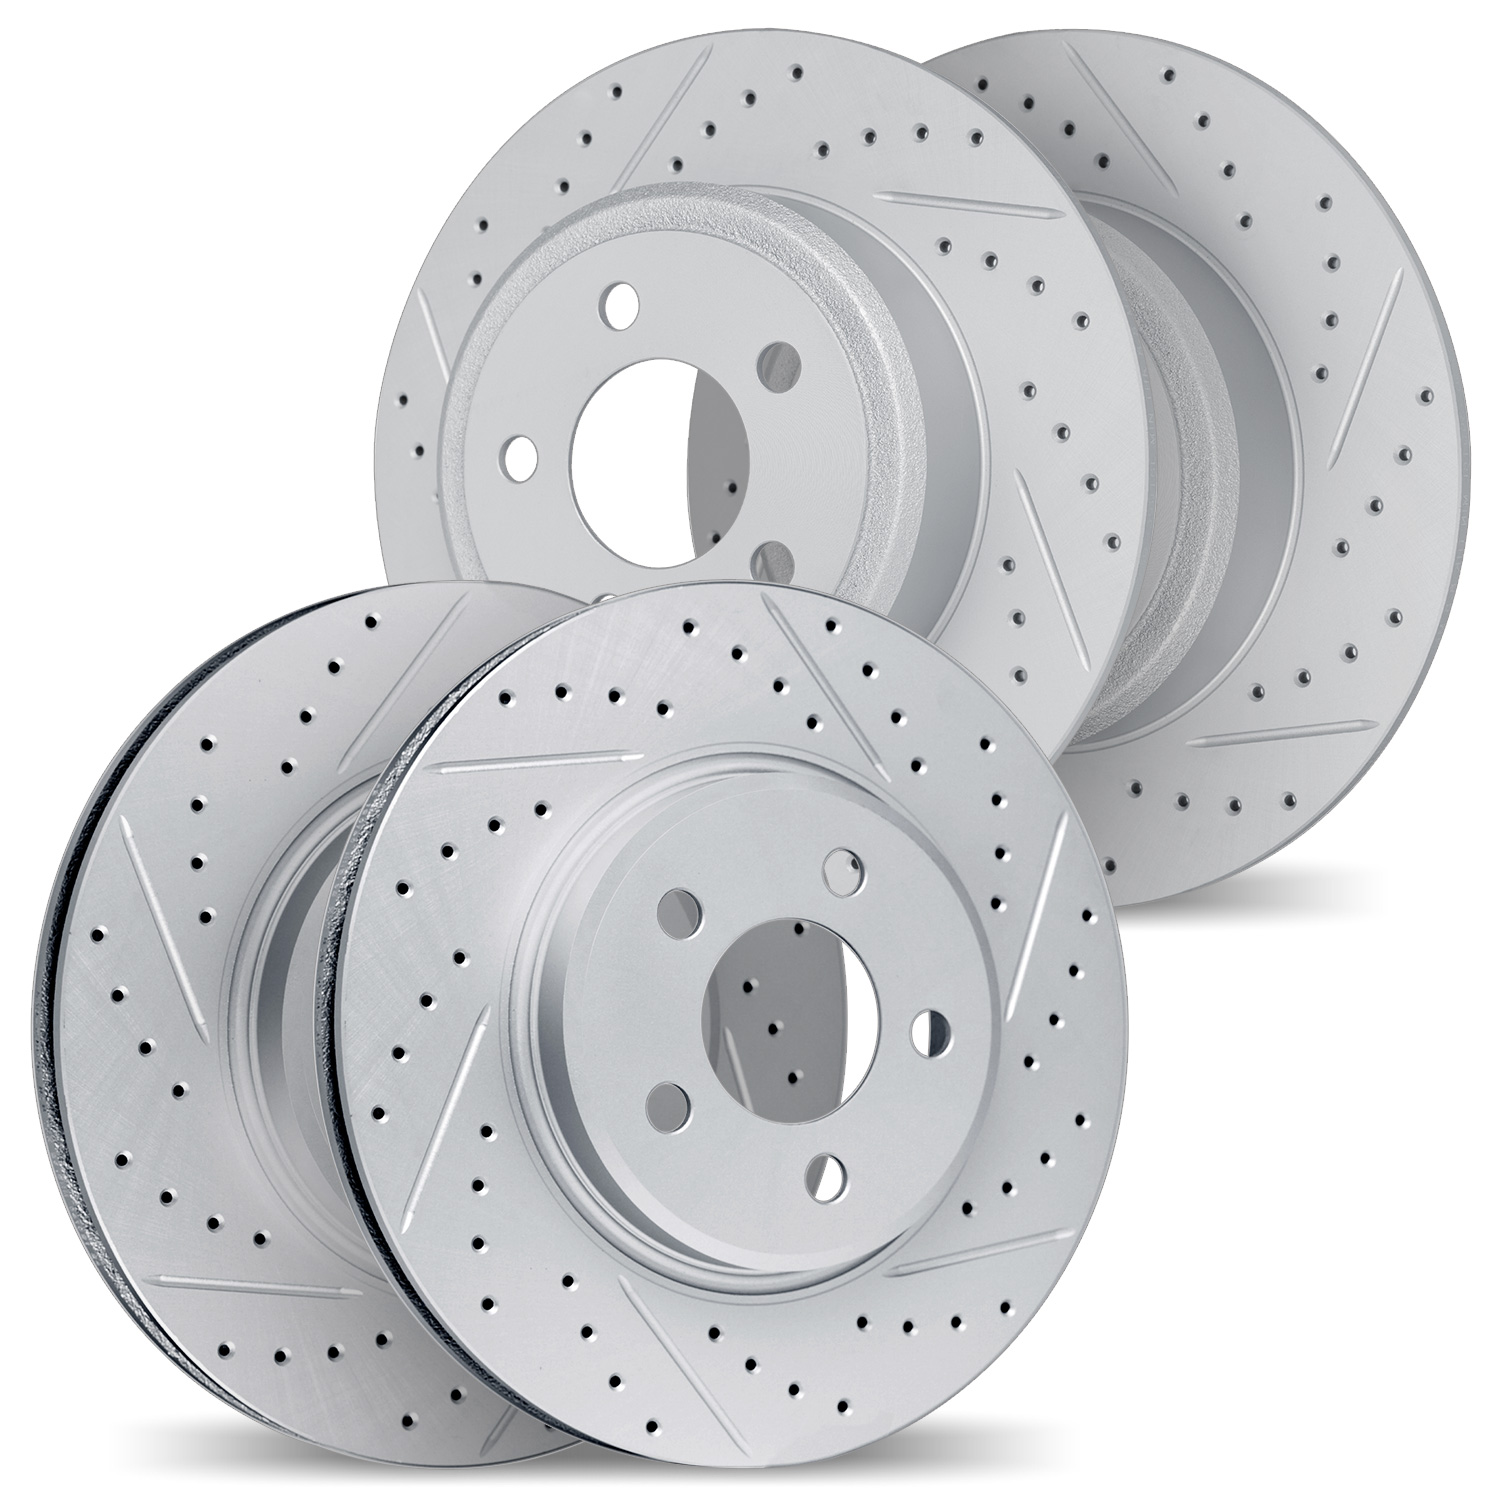 2004-75013 Geoperformance Drilled/Slotted Brake Rotors, 2009-2013 Lexus/Toyota/Scion, Position: Front and Rear